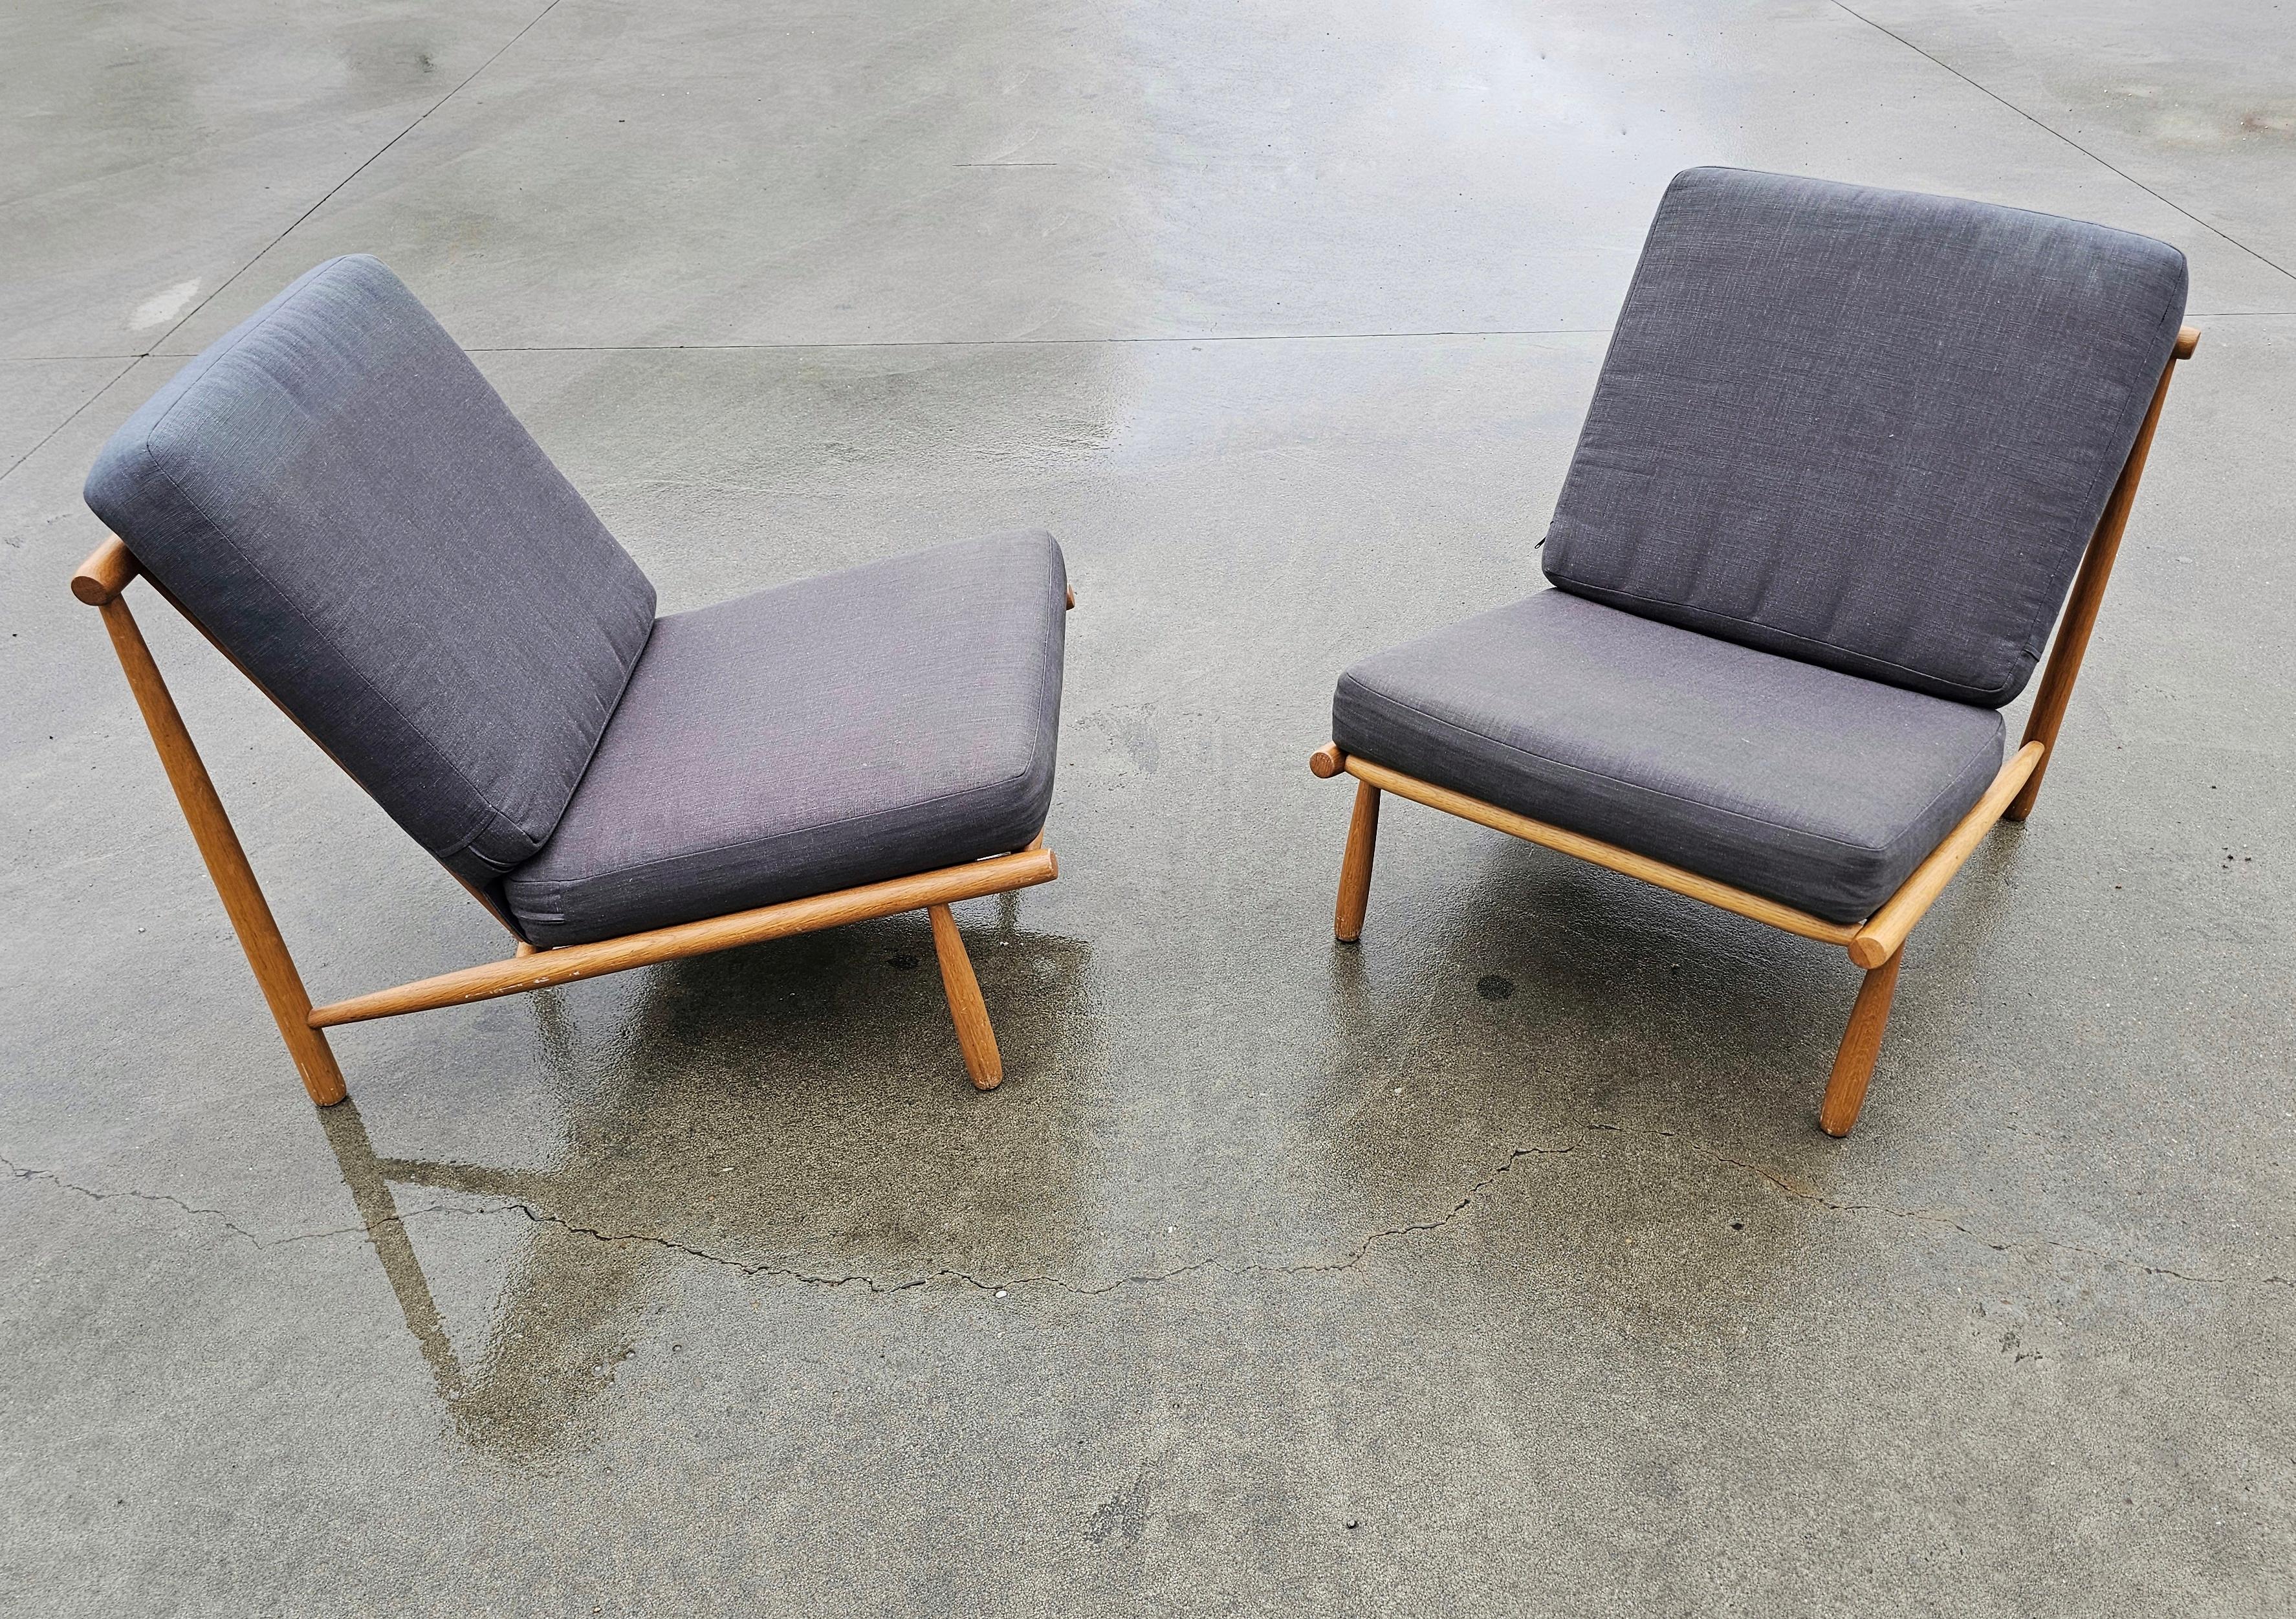 Mid-Century Modern Pair of Domus Lounge Chairs by Alf Svensson for Dux Sweden, Sweden 1960s For Sale